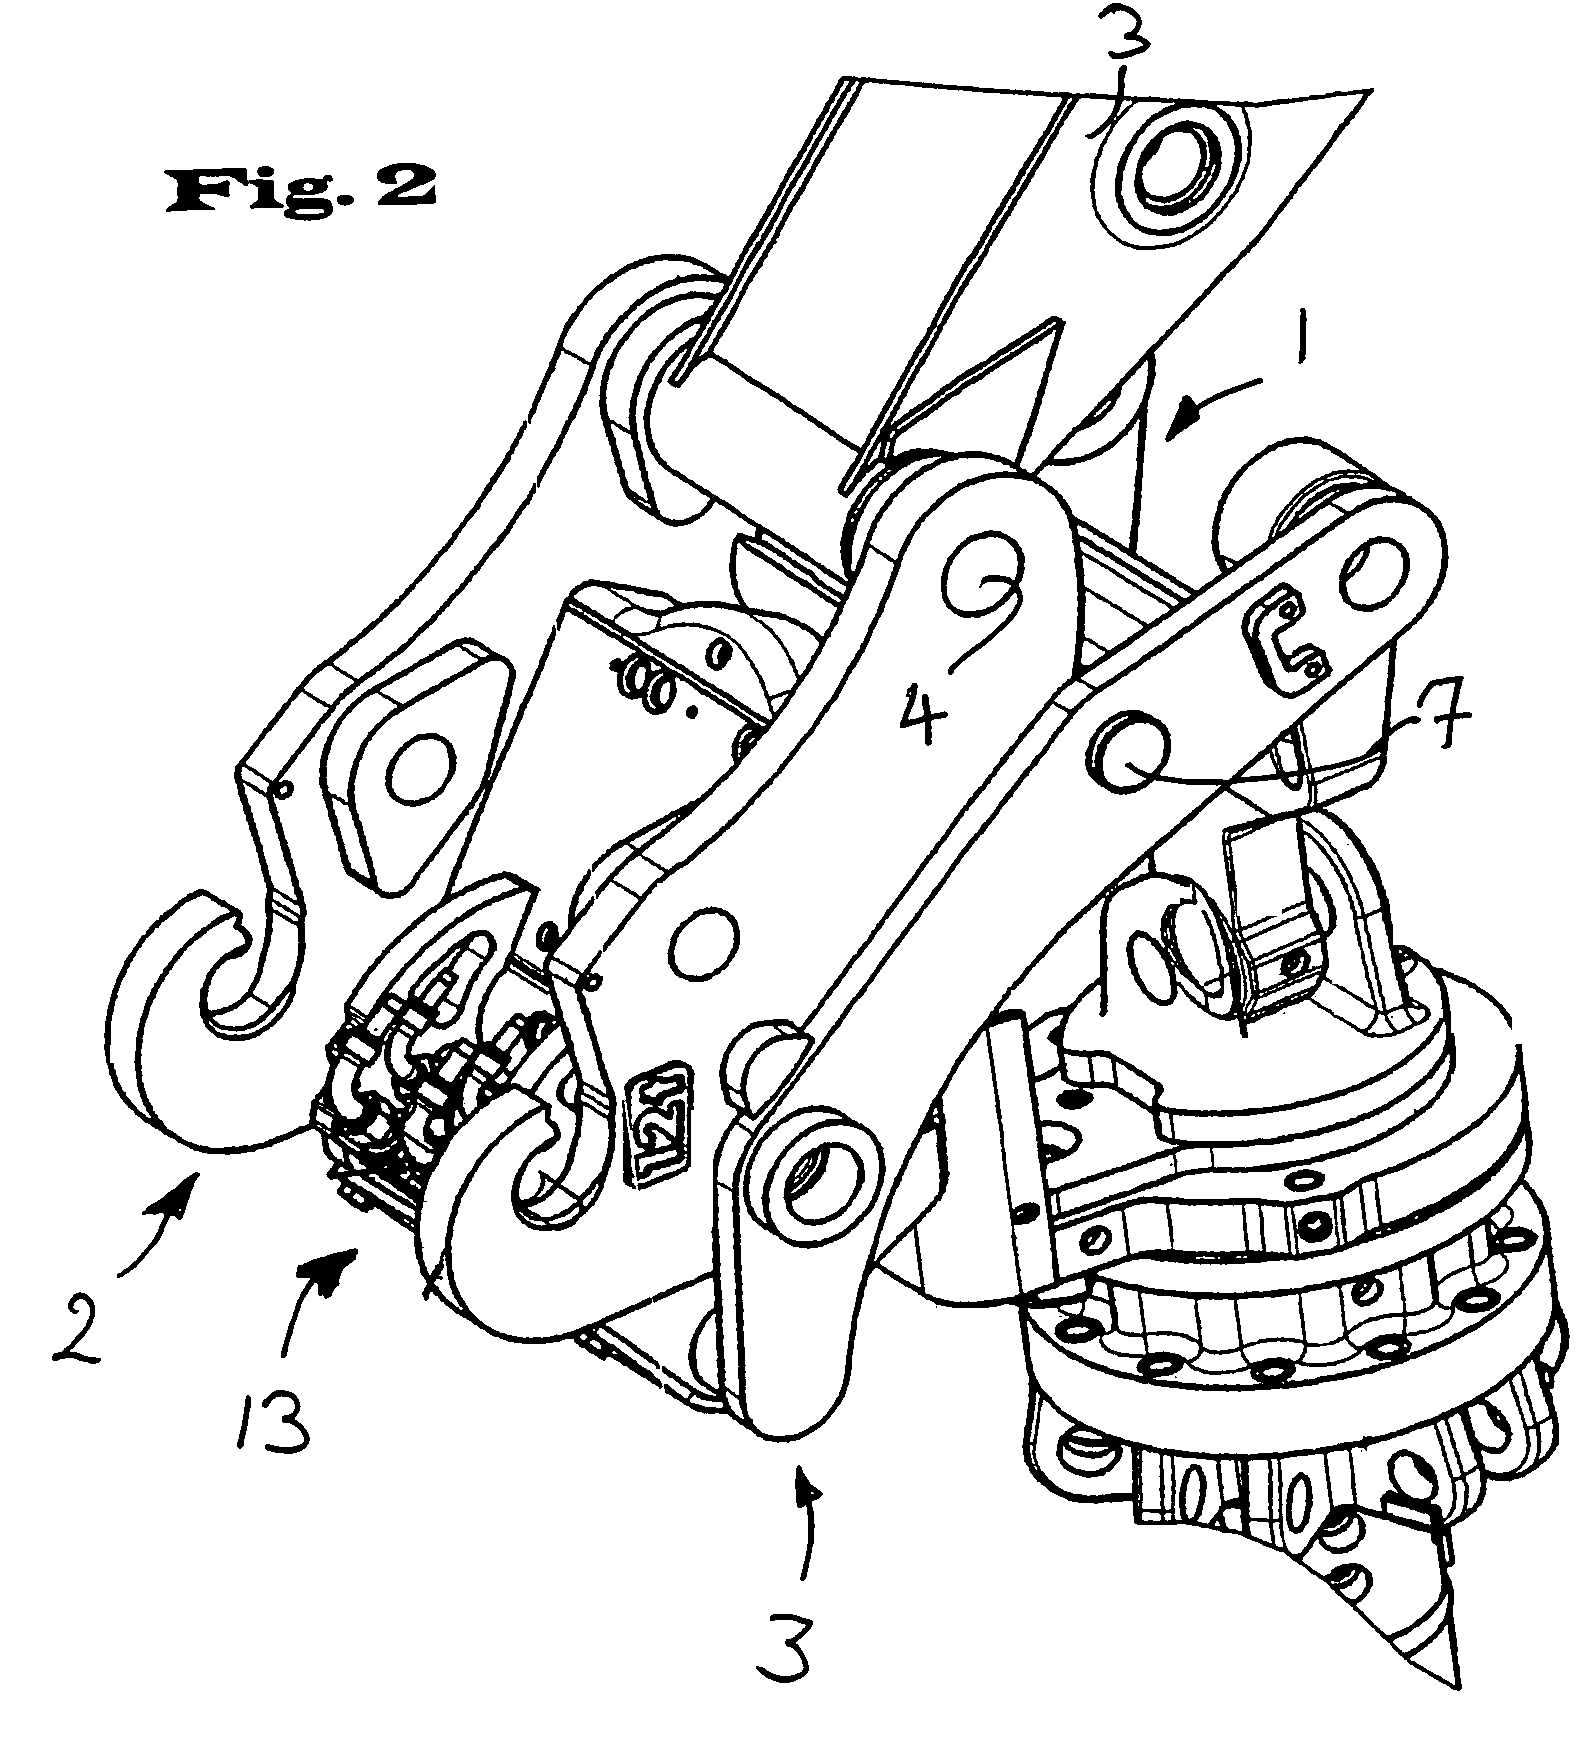 Construction machine with a quick coupler